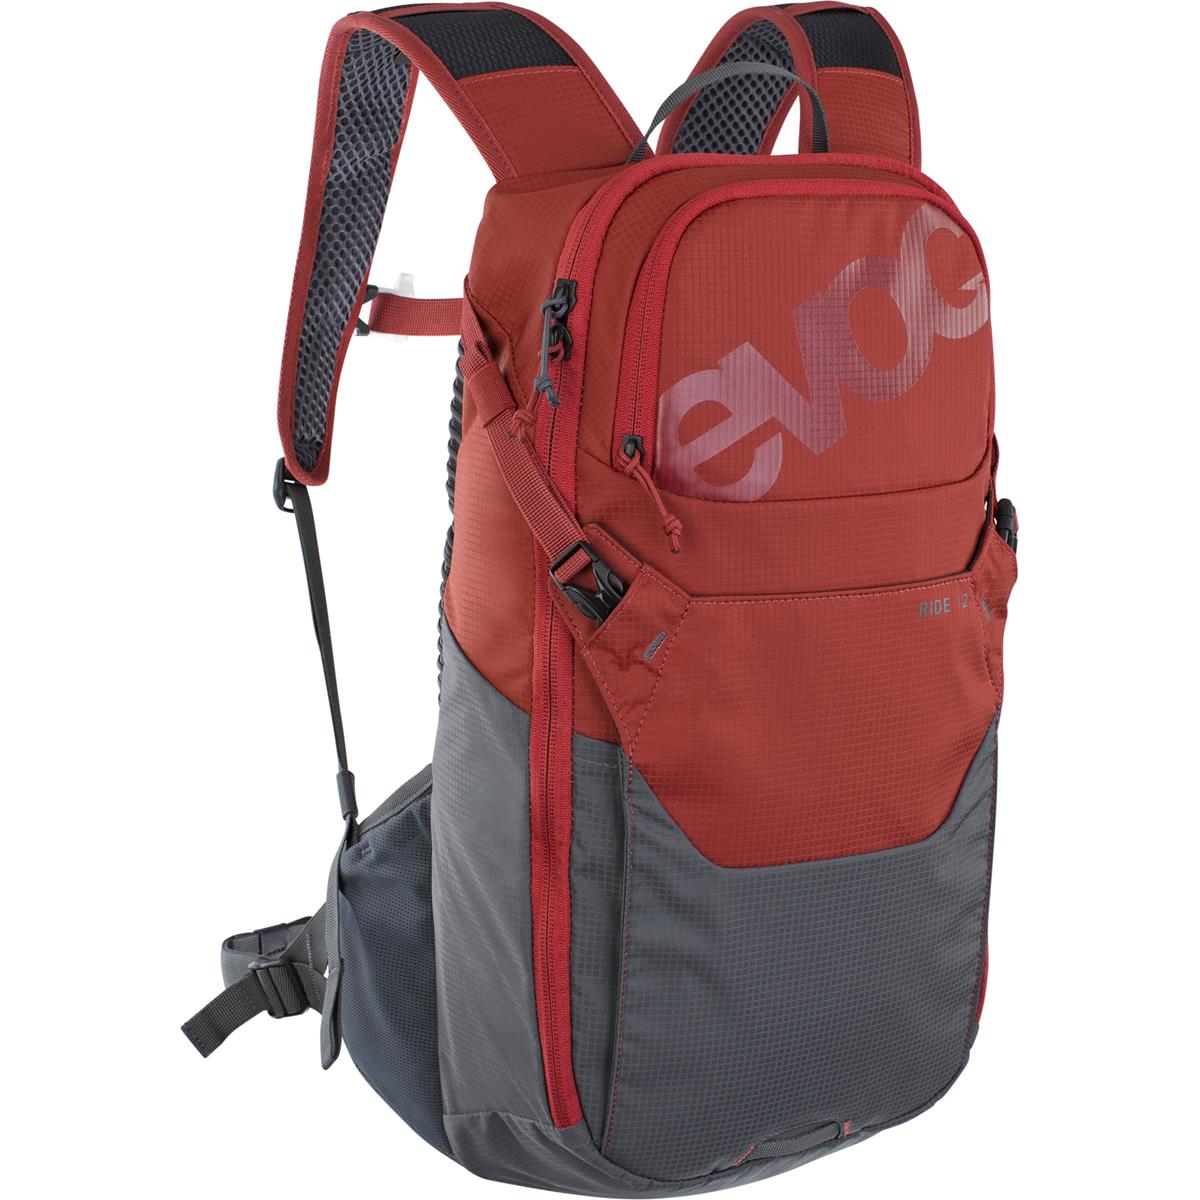 Evoc Backpack with Hydration System Compartment Ride 12 + Chili Red/Carbon Gray